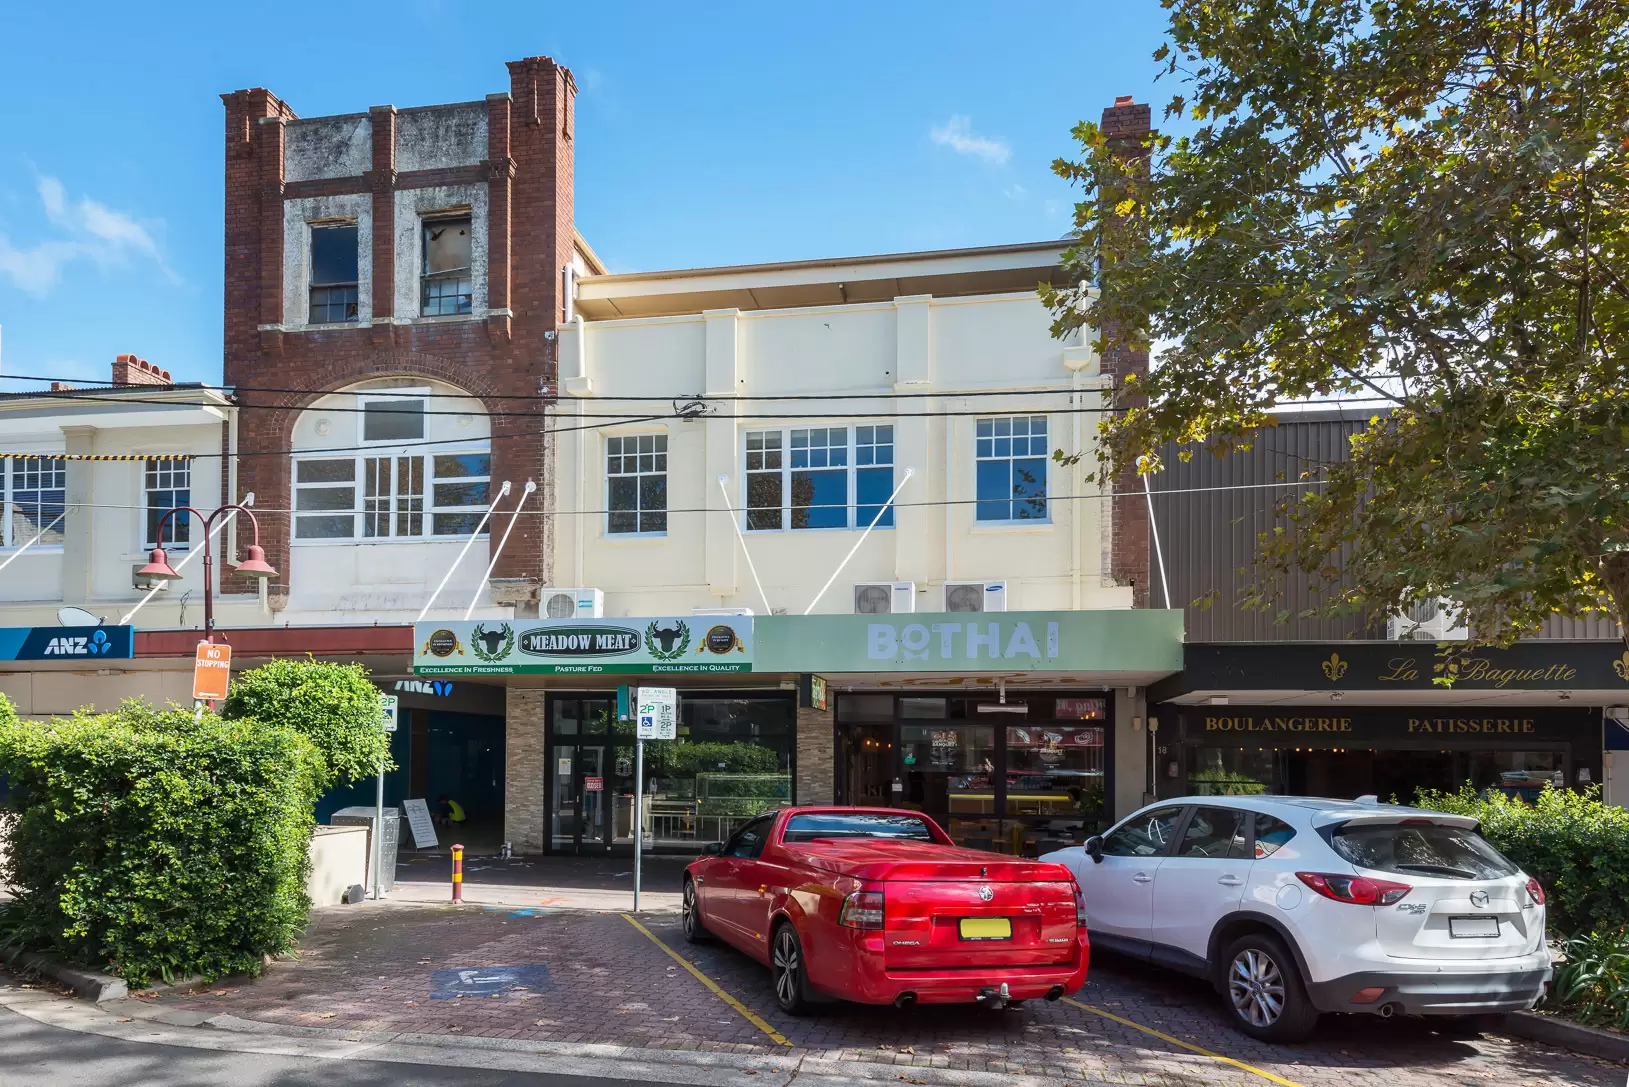 Crows Nest Leased by Shead Property - image 1